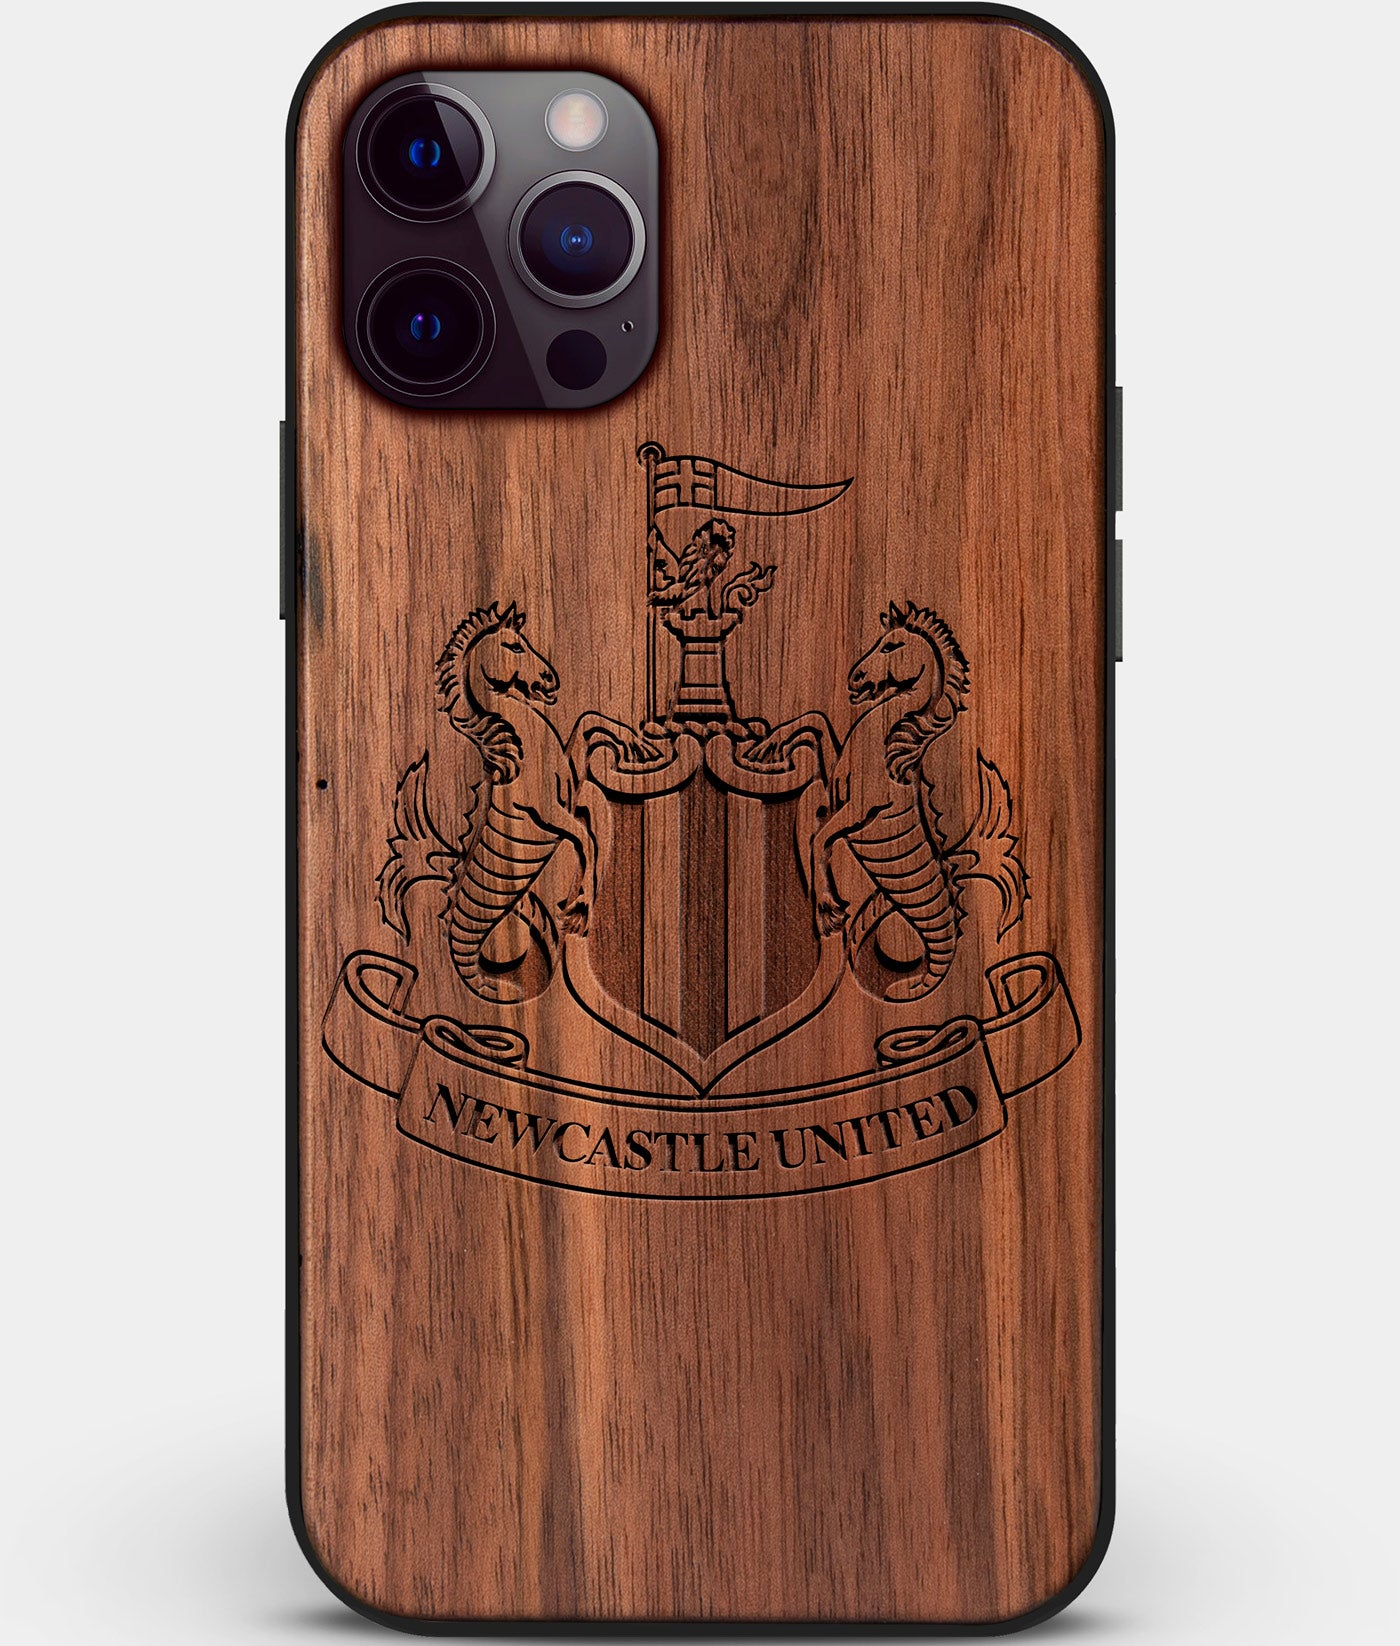 Custom Carved Wood Newcastle United F.C. iPhone 12 Pro Case | Personalized Walnut Wood Newcastle United F.C. Cover, Birthday Gift, Gifts For Him, Monogrammed Gift For Fan | by Engraved In Nature